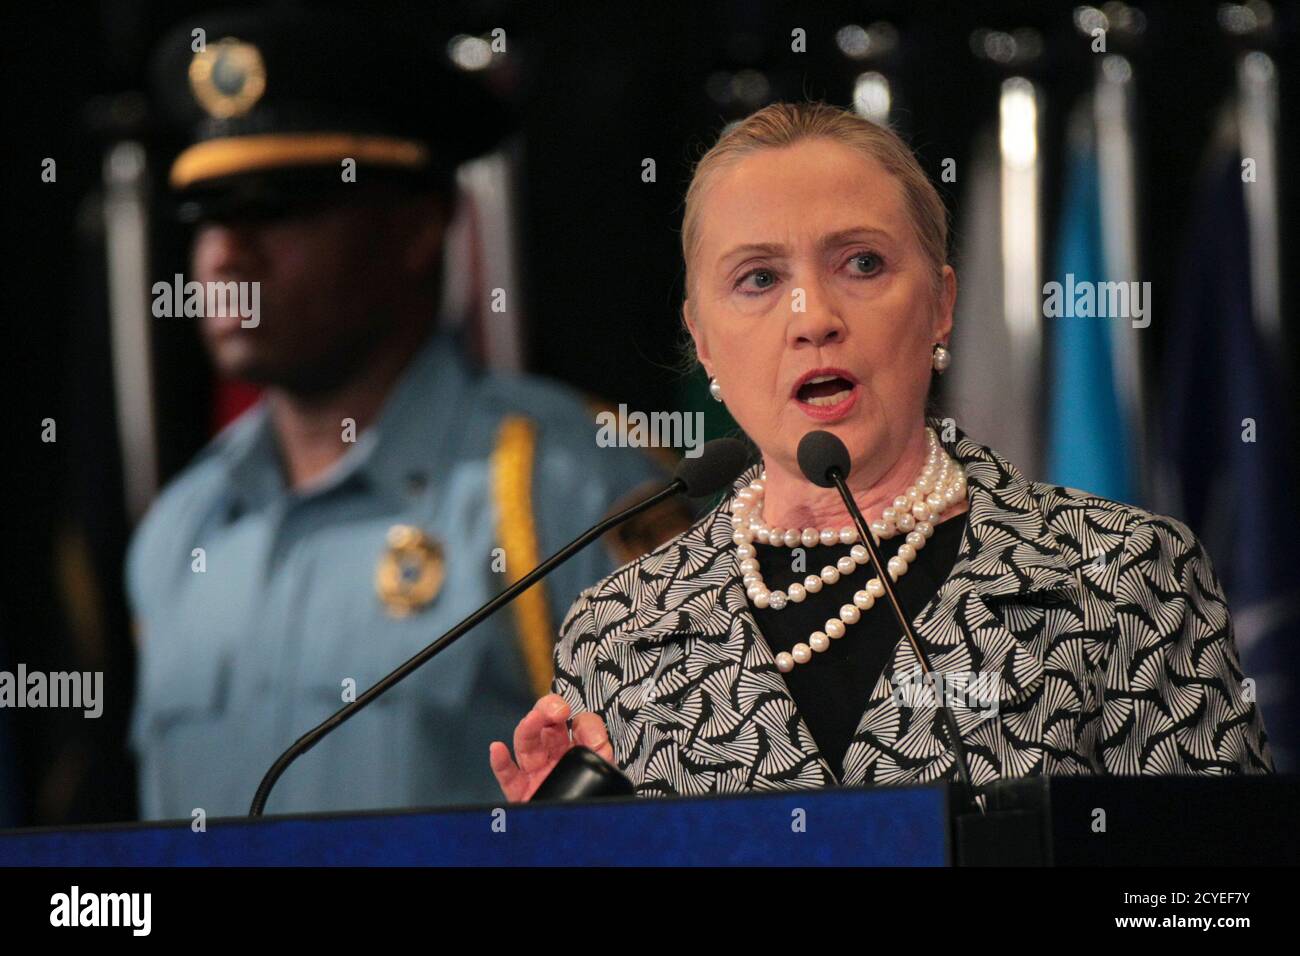 U S Secretary Of State Hillary Clinton Speaks During The Rio United Nations Conference On Sustainable Development In Rio De Janeiro June 22 12 The Rio United Nations Conference On Sustainable Development